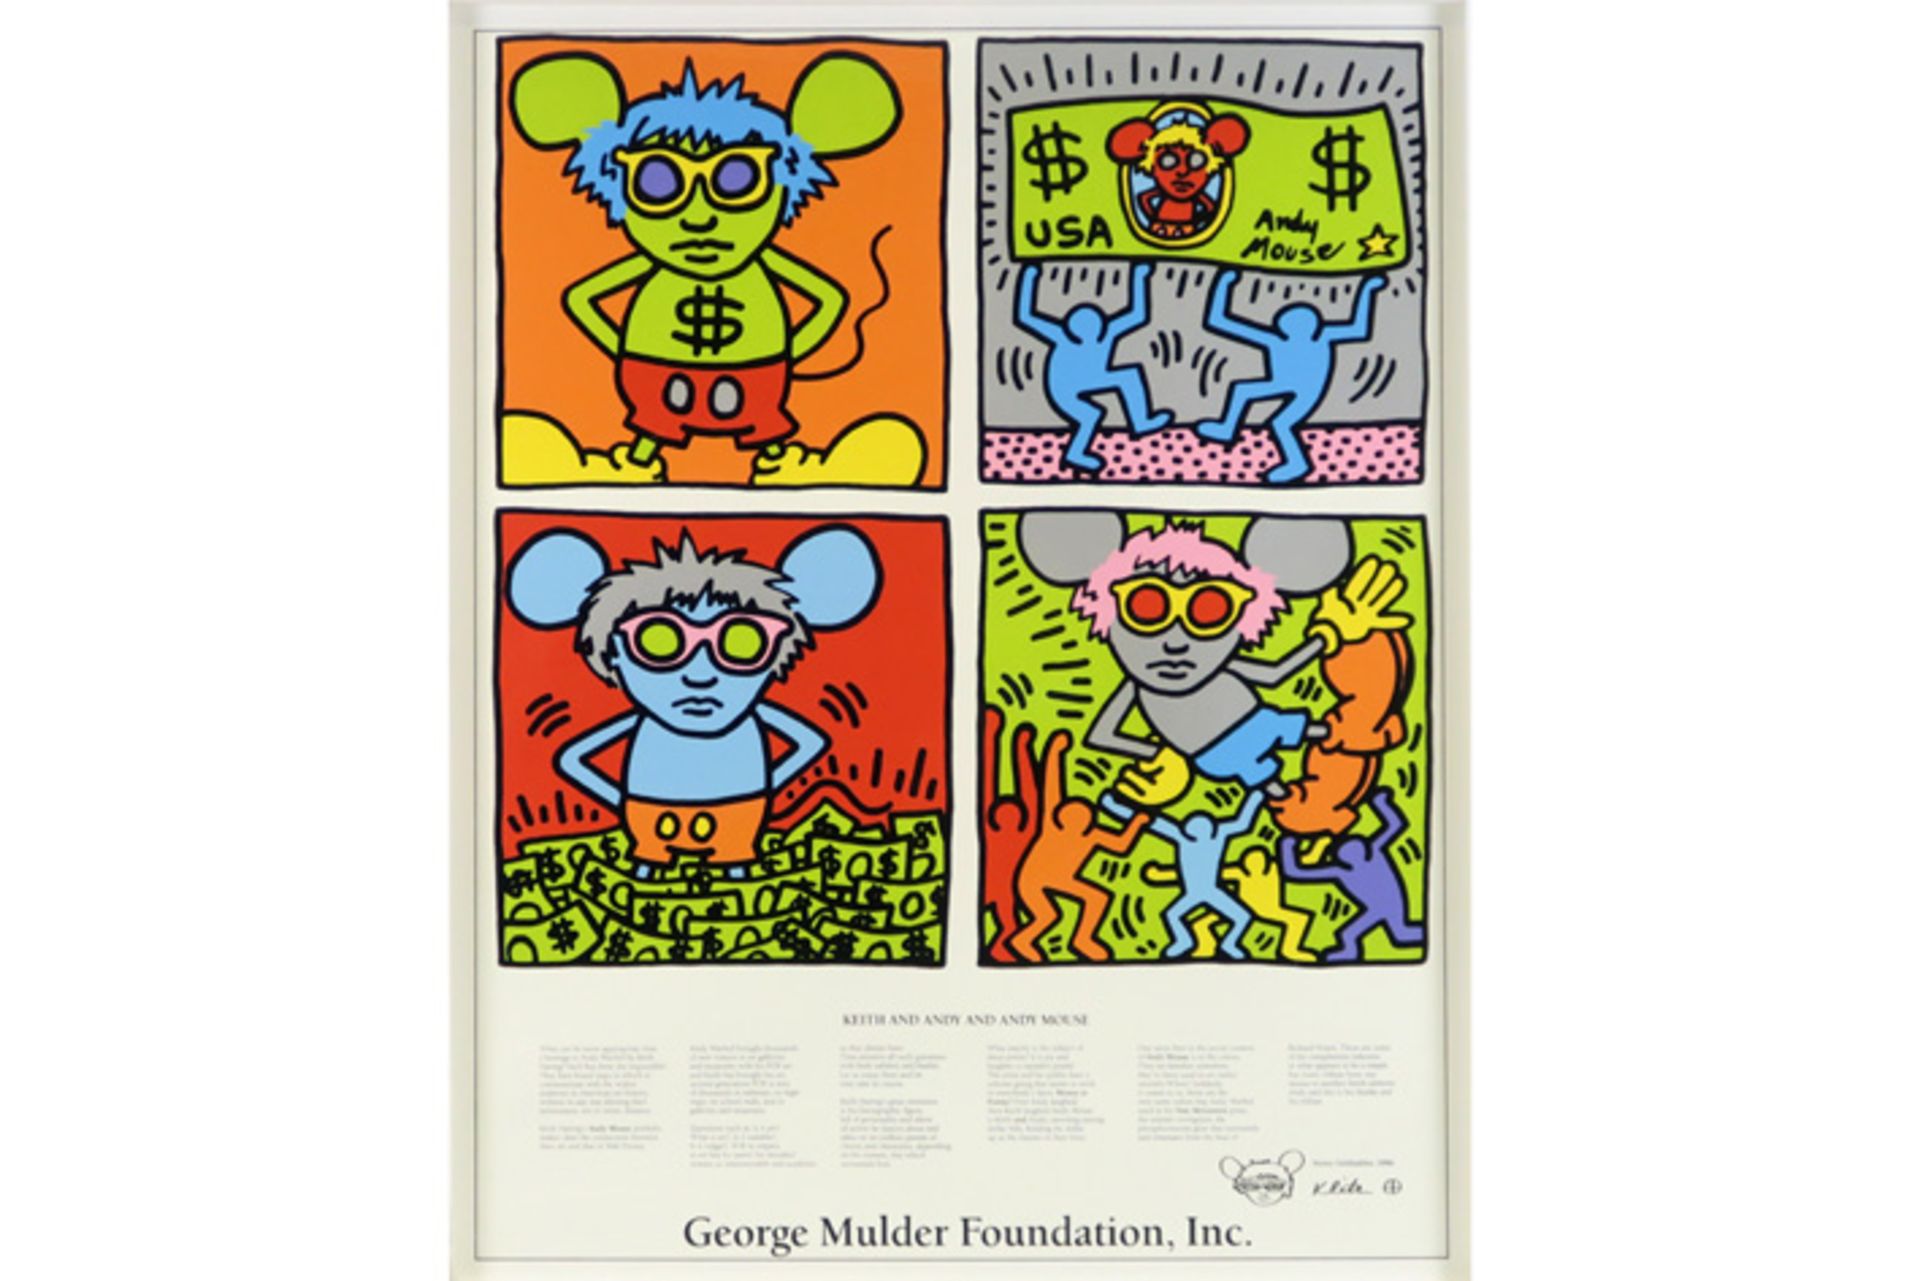 Keith Haring signed drawing on a print titled "Keith Haring and Andy and Andy Mouse", a limitied